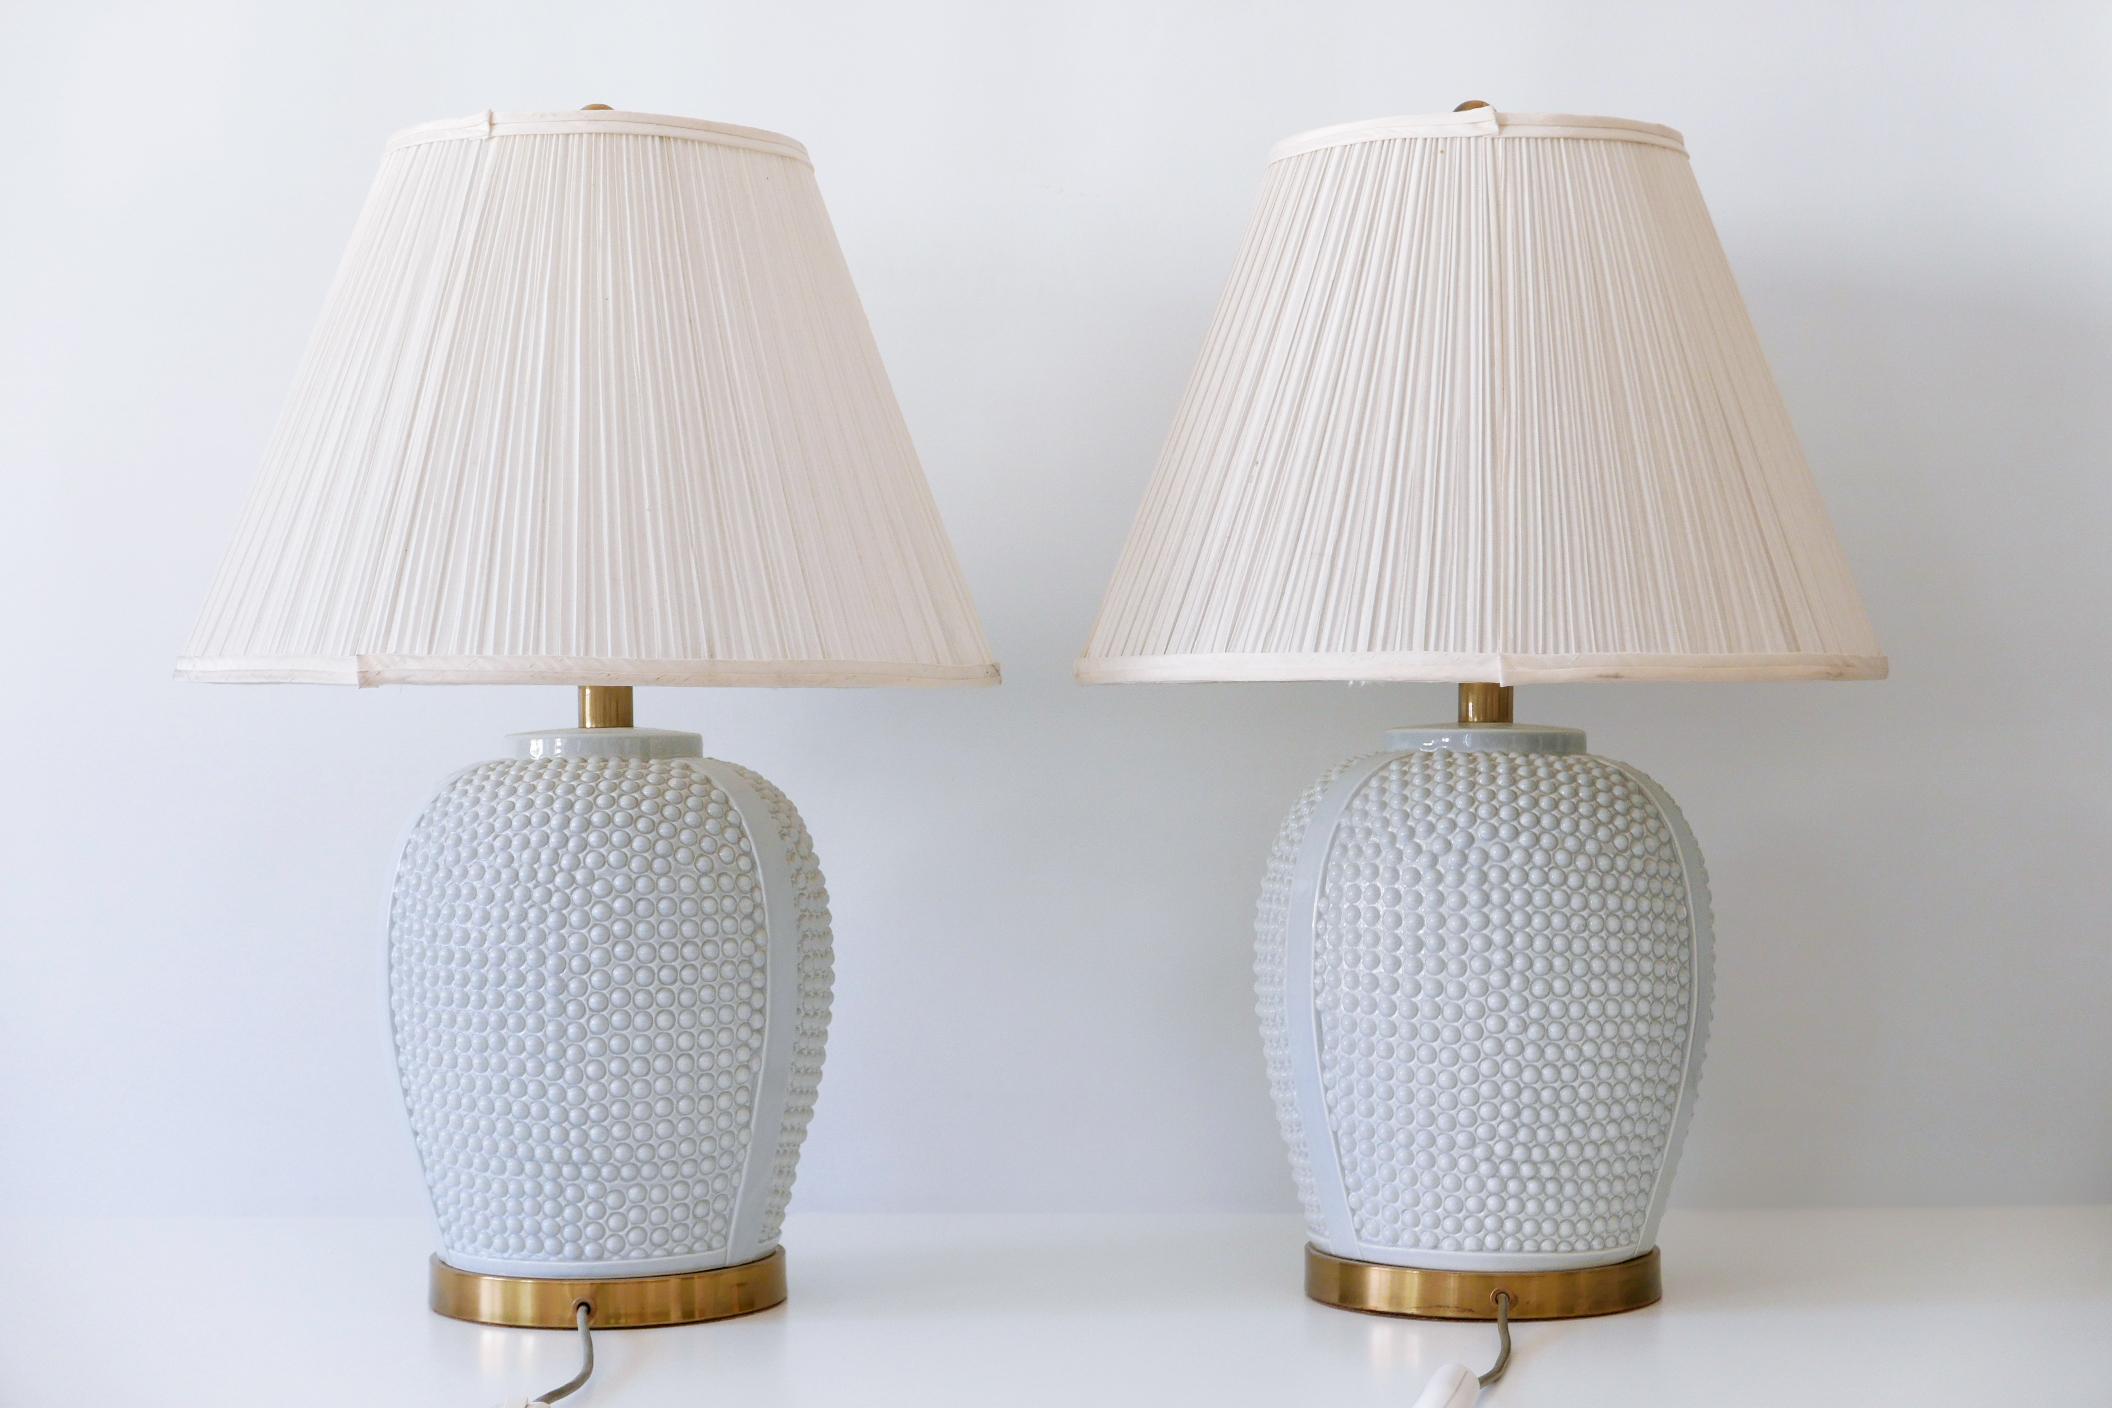 Set of Two Exceptional Mid-Century Modern Ceramic Table Lamps, 1960s, Germany For Sale 2